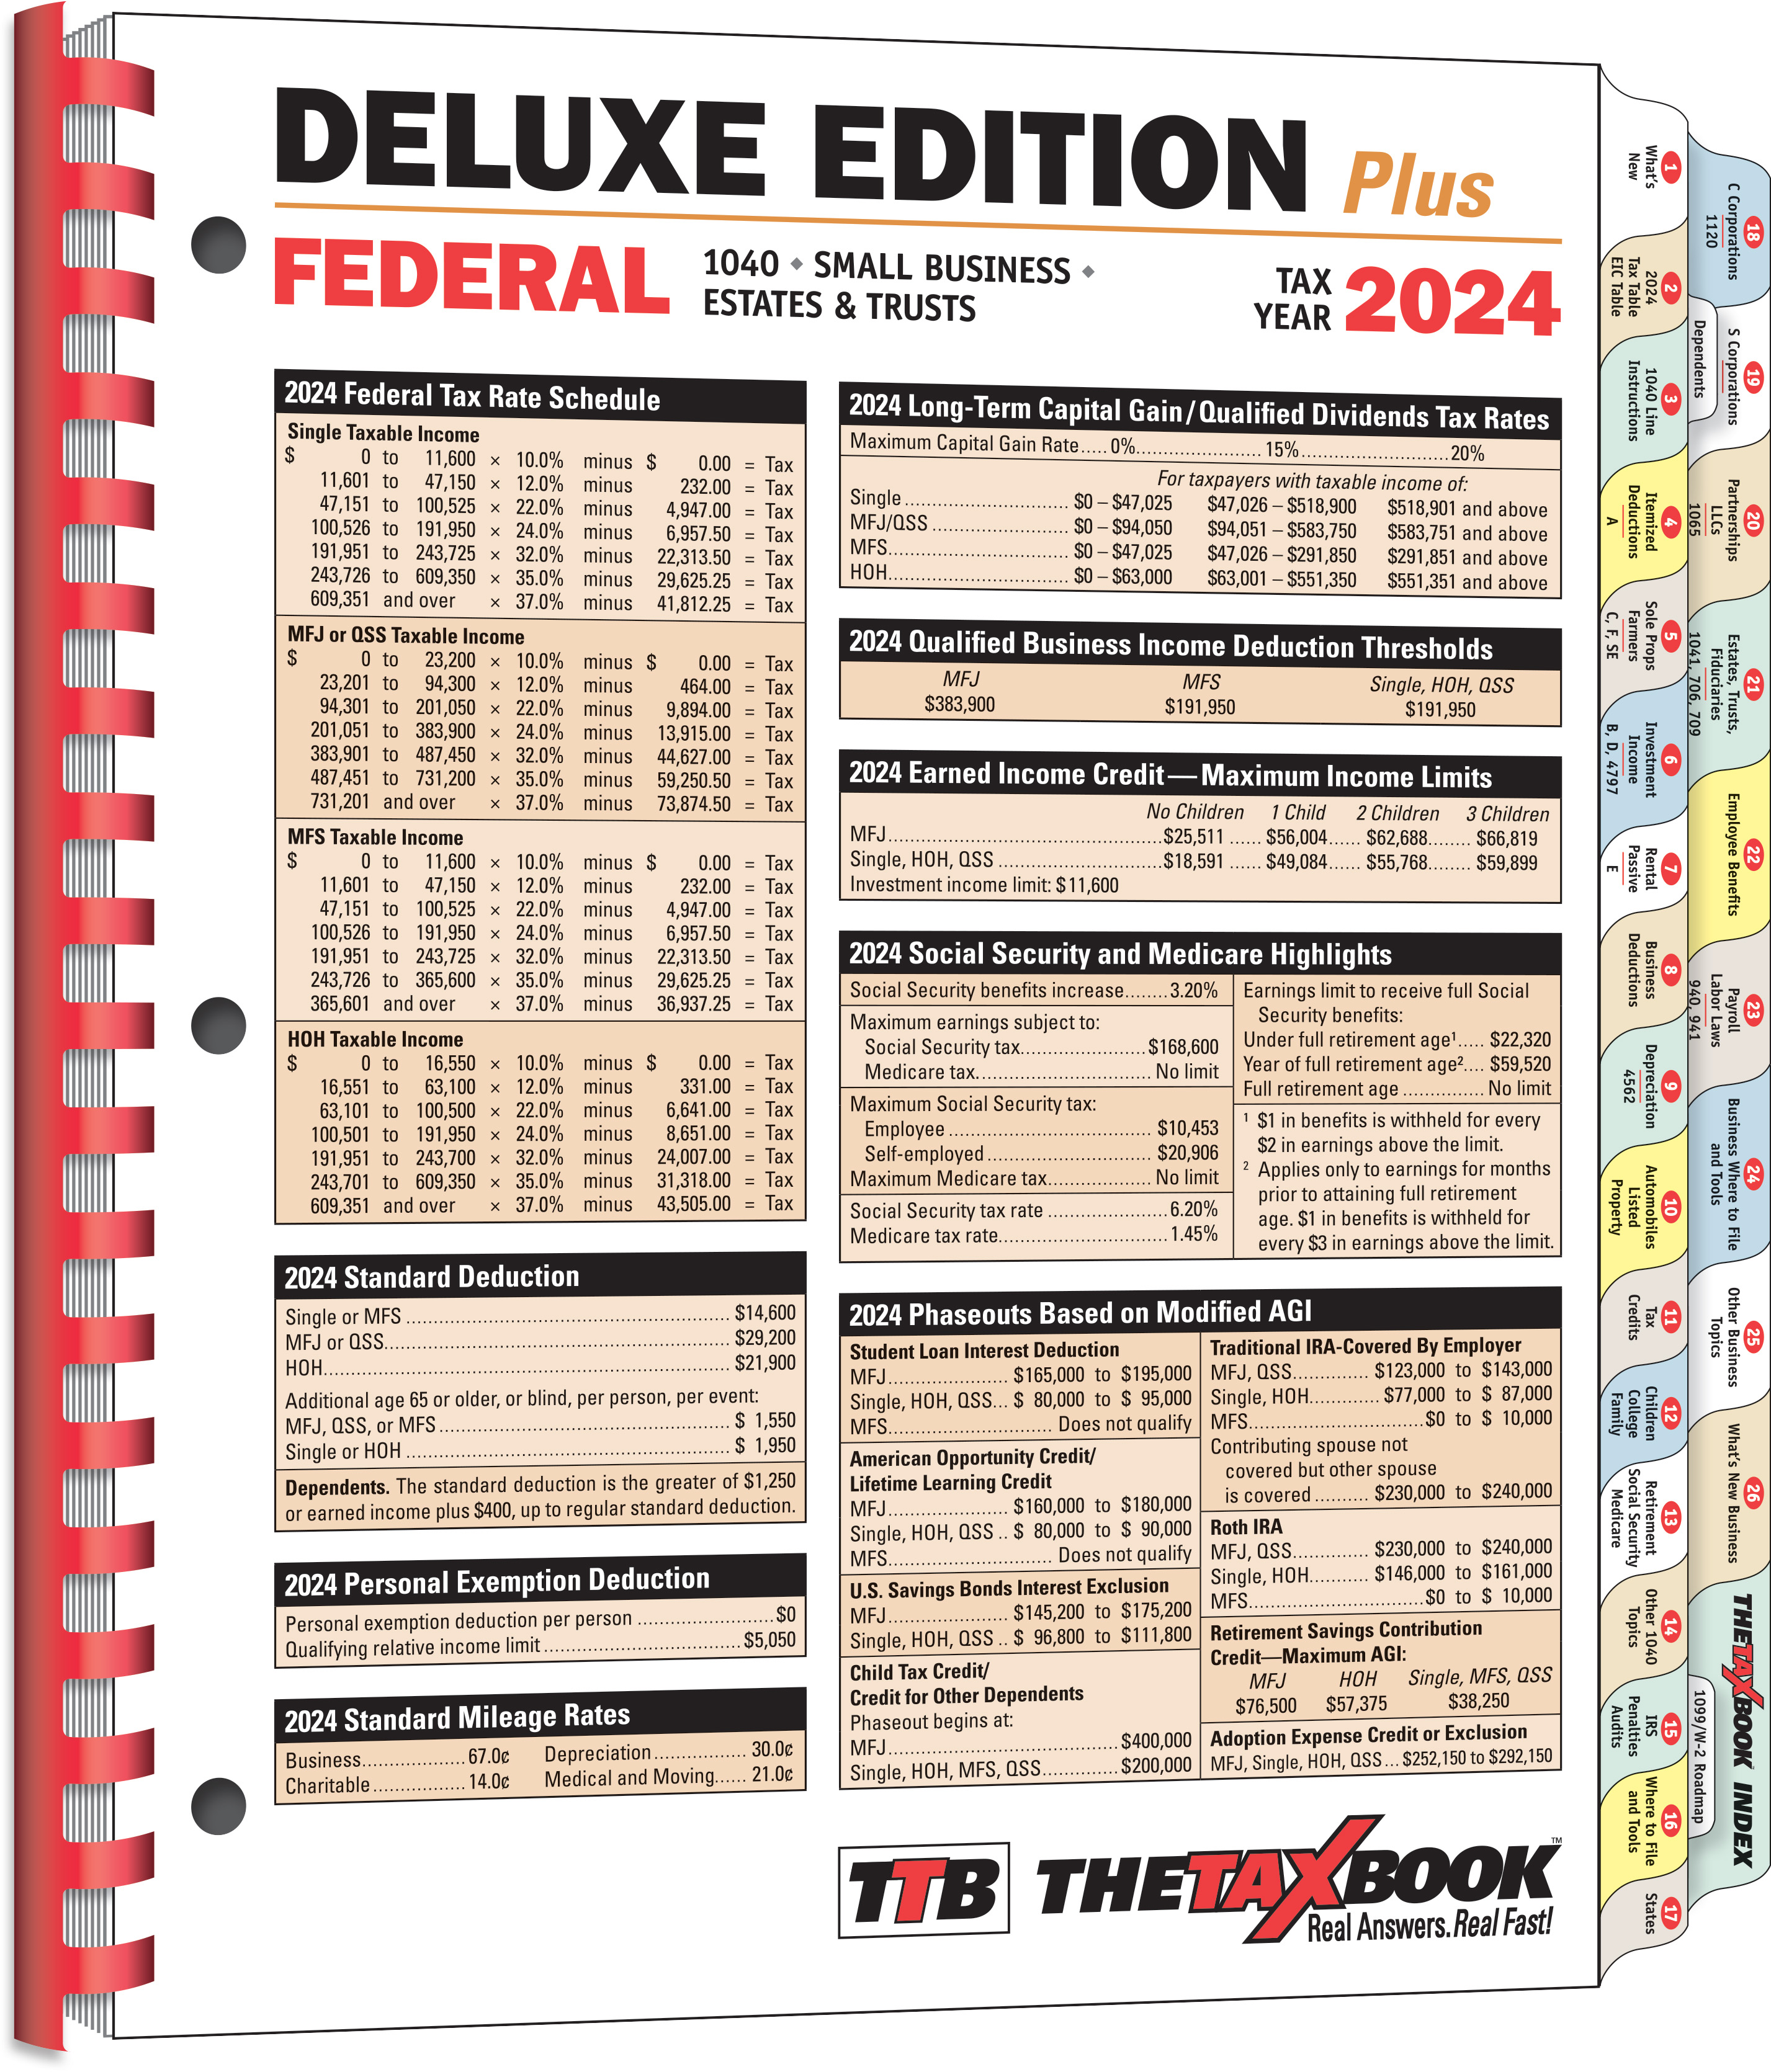 The TaxBook Deluxe Edition Plus